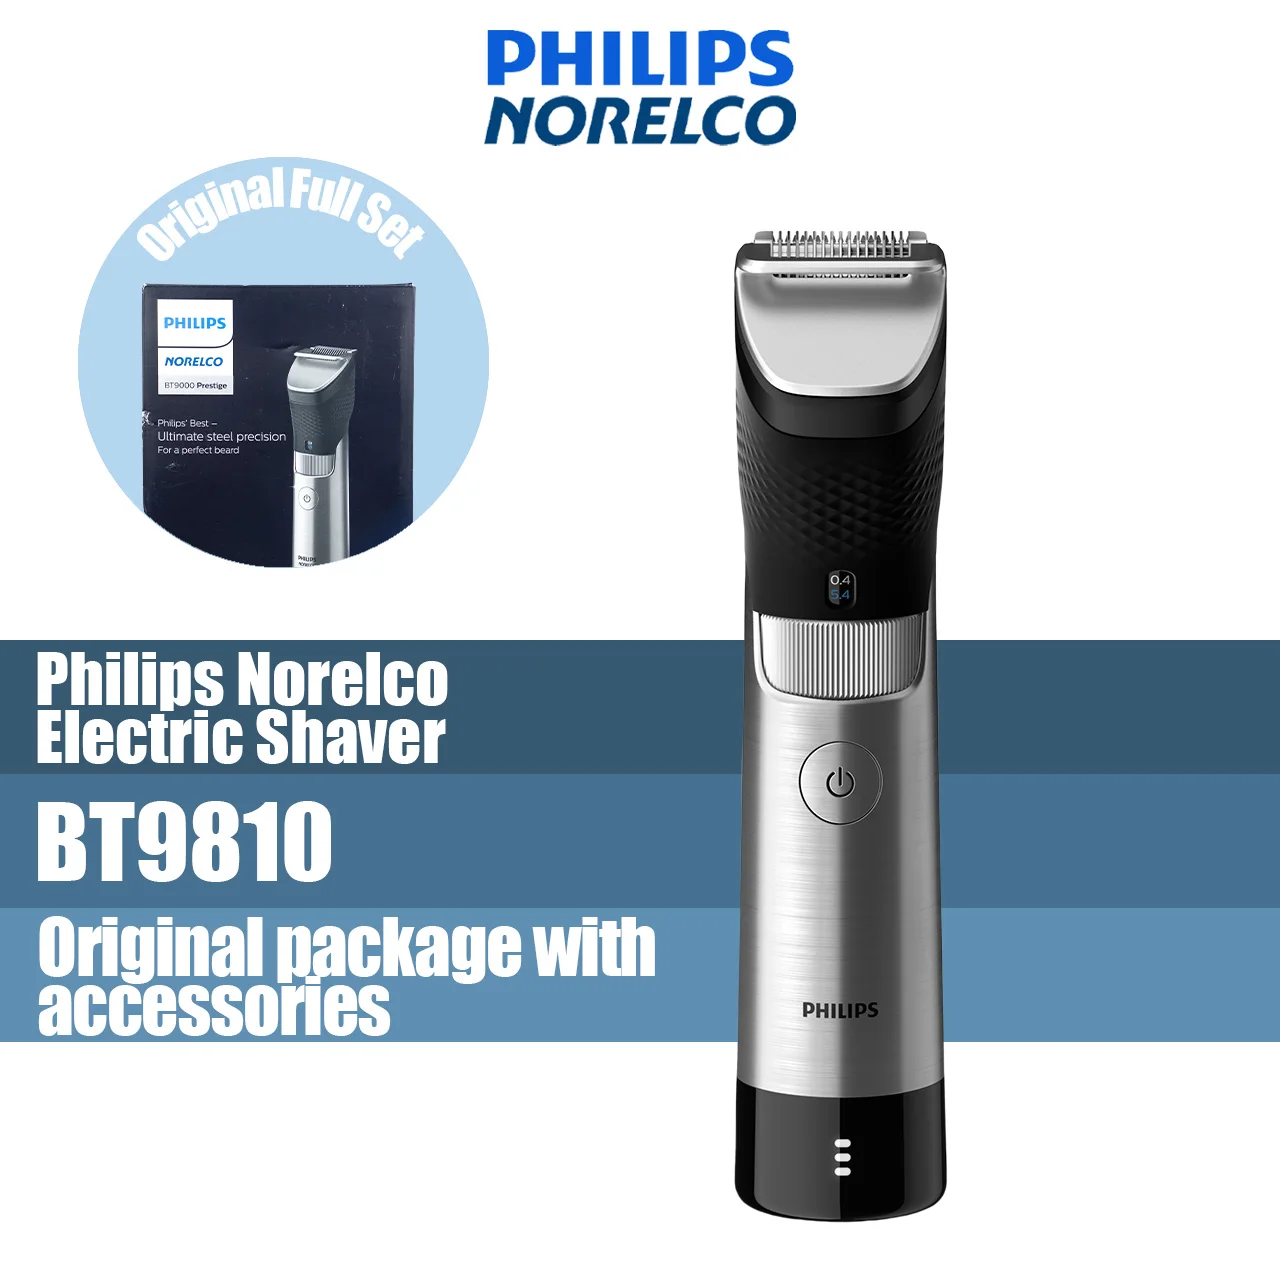 

Philips Norelco Rechargeable Hybrid Electric Trimmer and Shaver BT9810, Stainless steel 30 Lithium-Ion